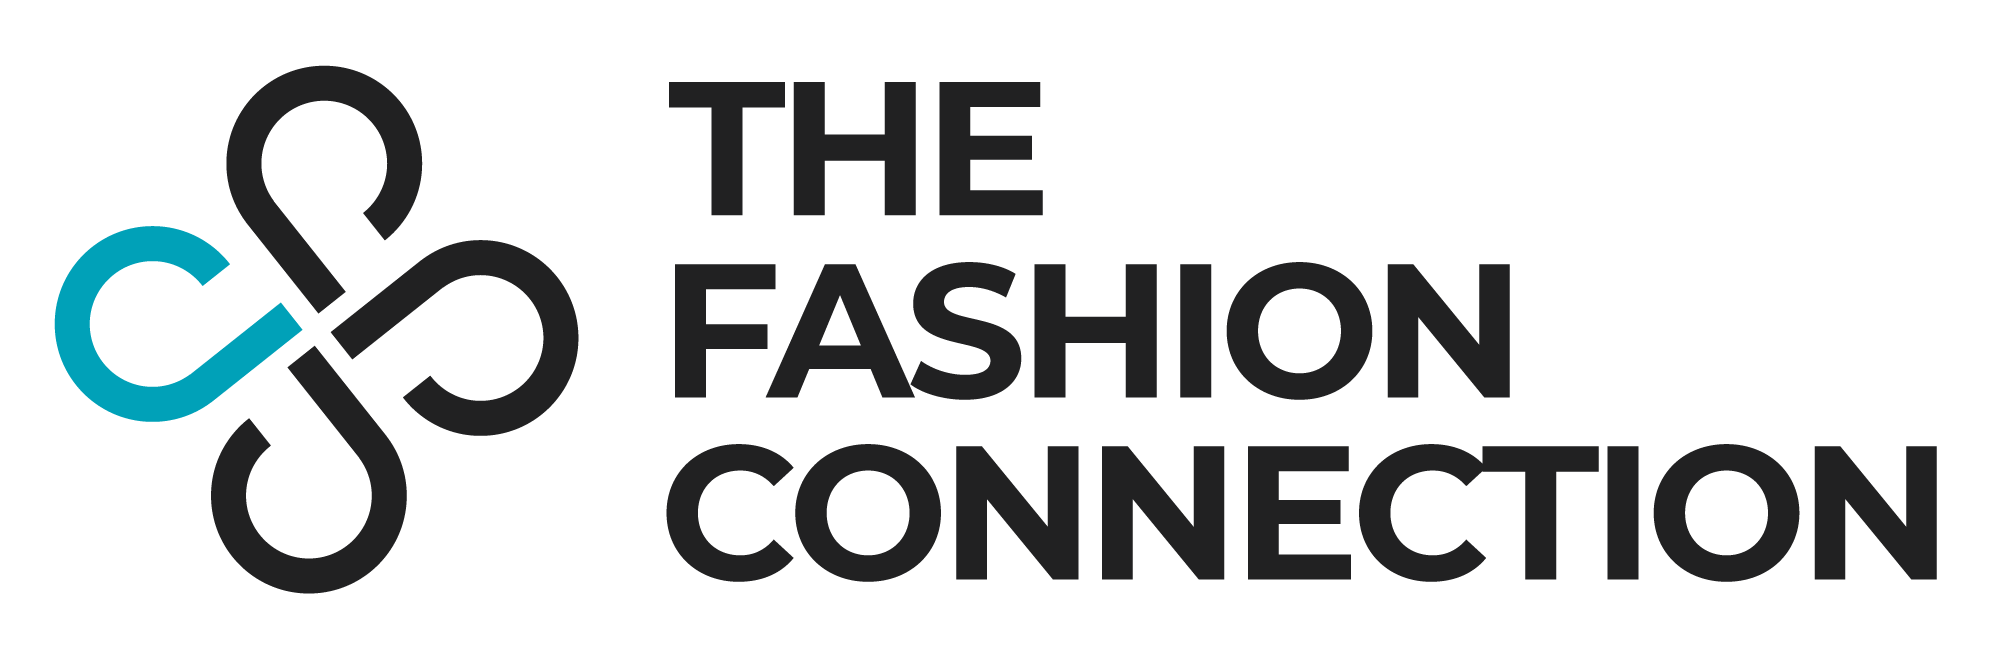 The_Fashion_Connection_image_color_PNG (2).png